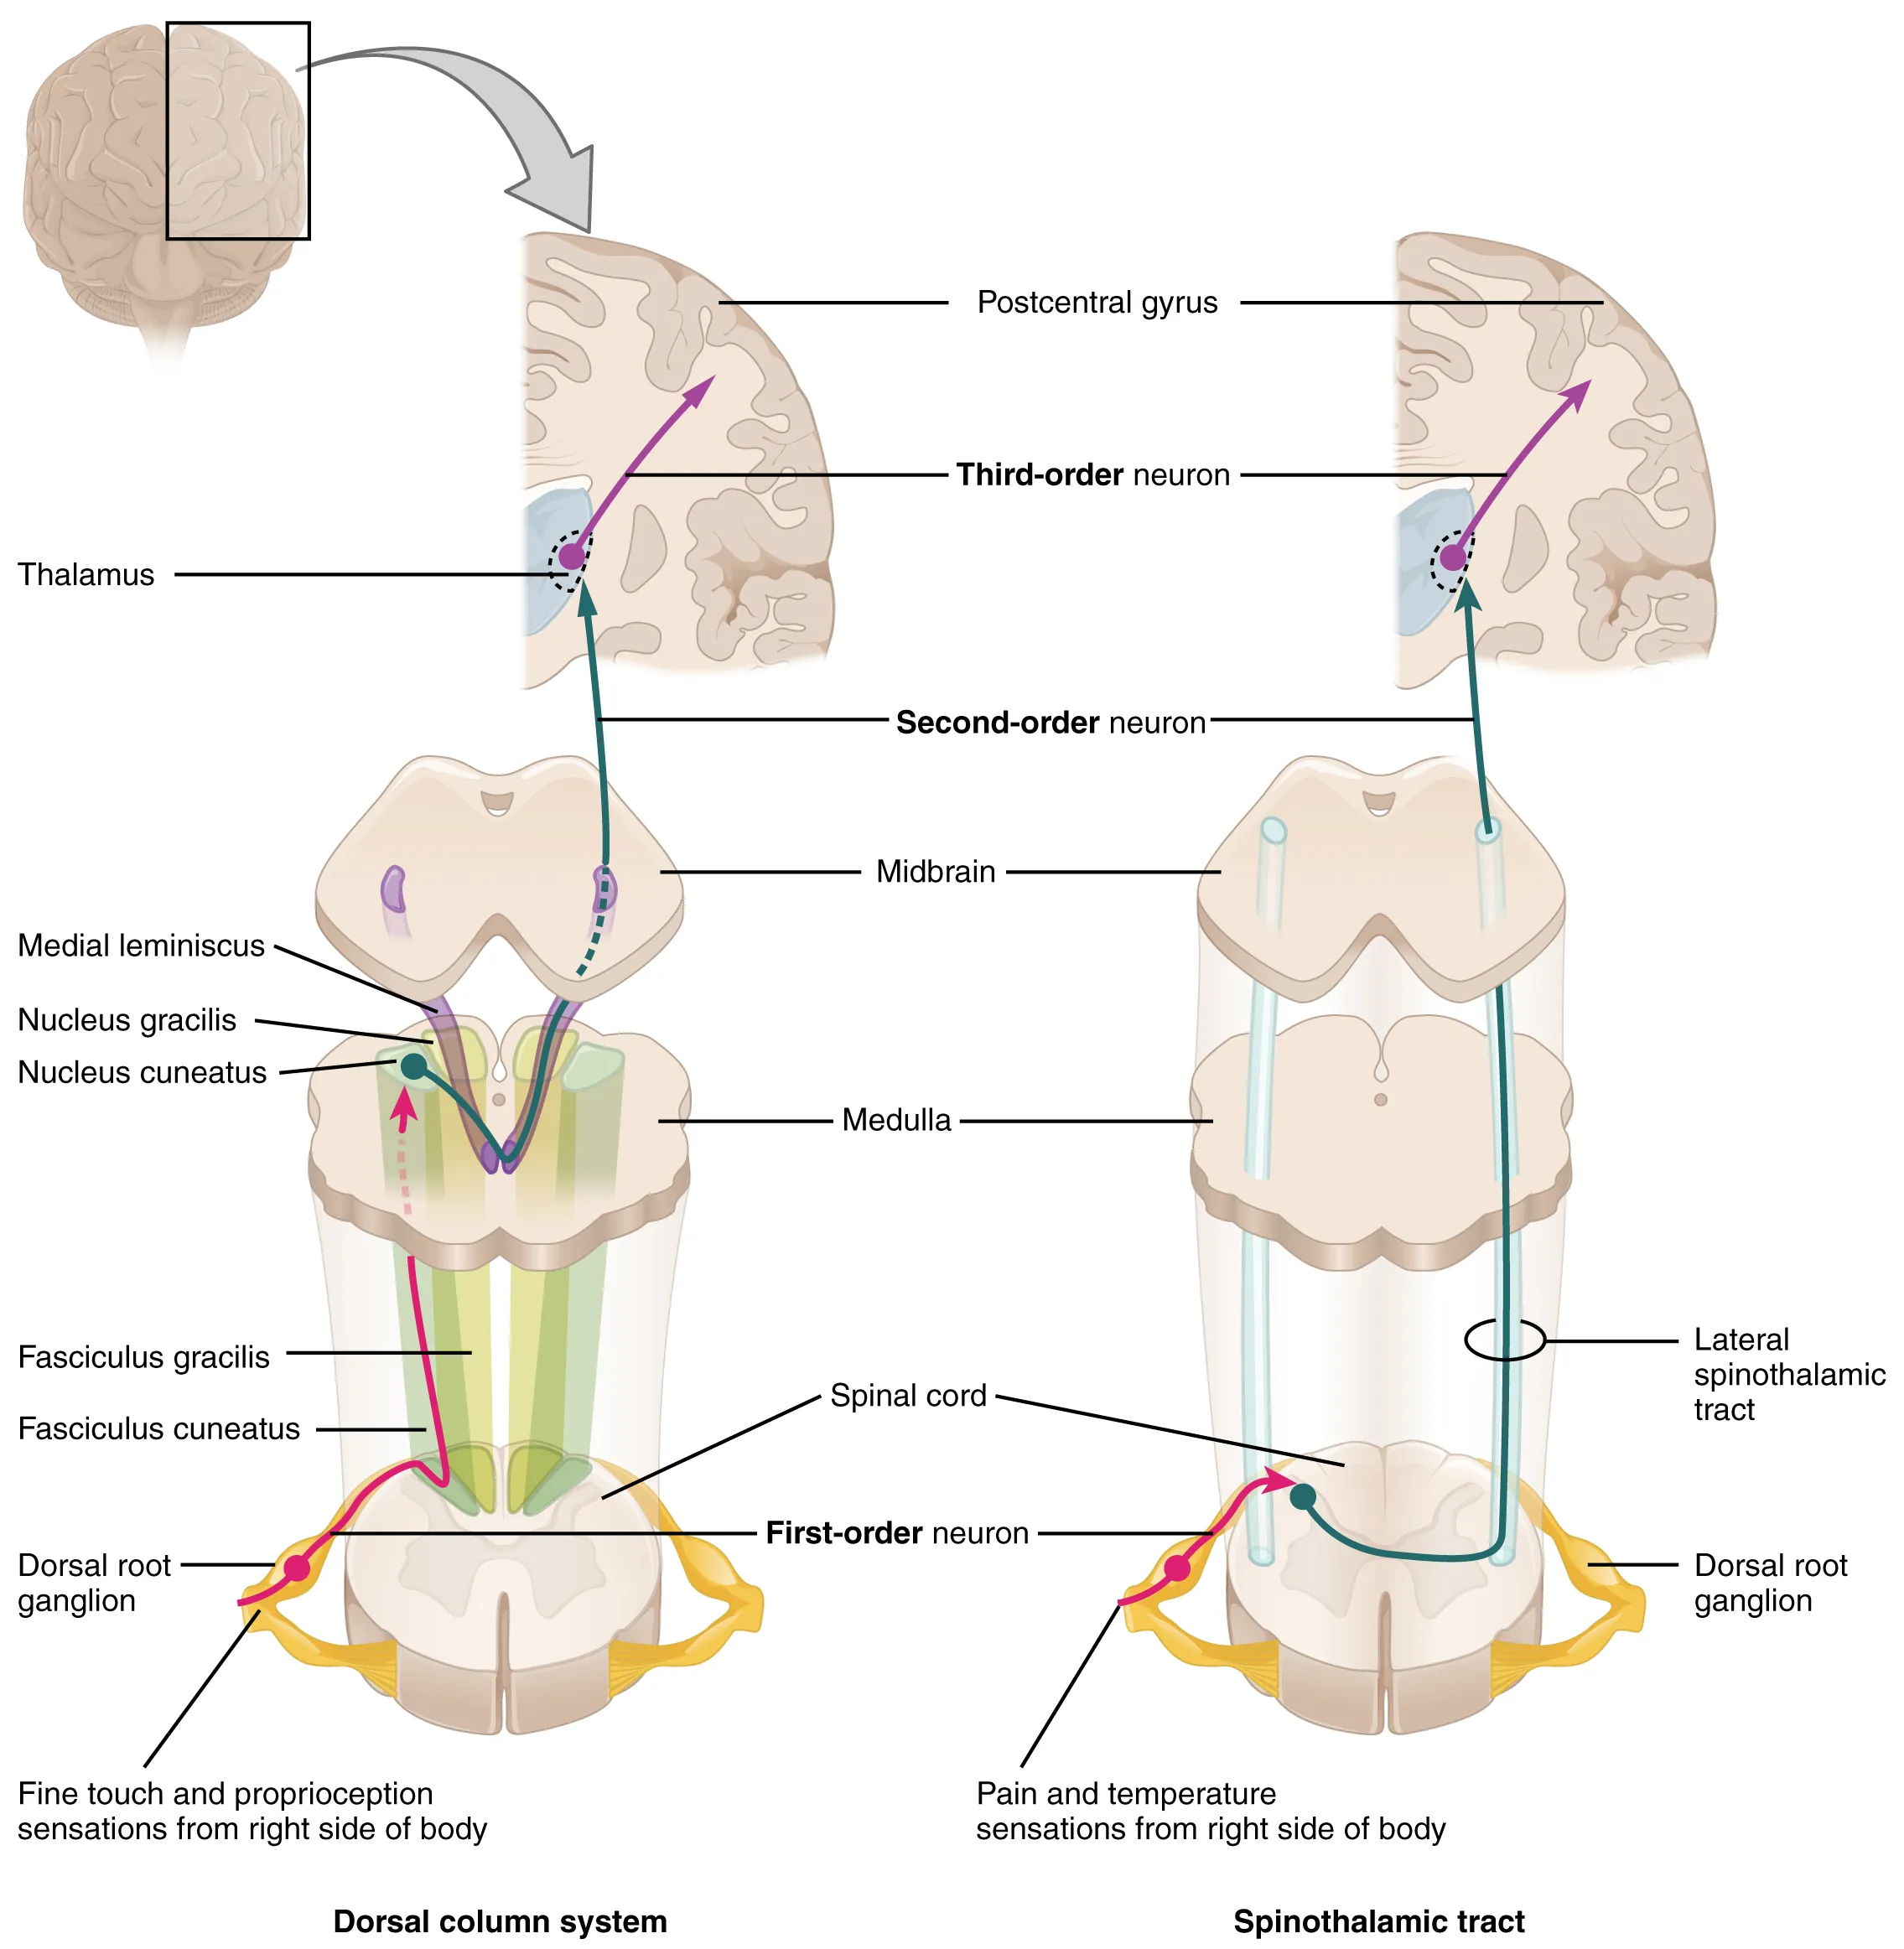 The left panel shows the dorsal column system and its connection to the brain. The right column shows the spinothalamic tract and its connection to the brain.